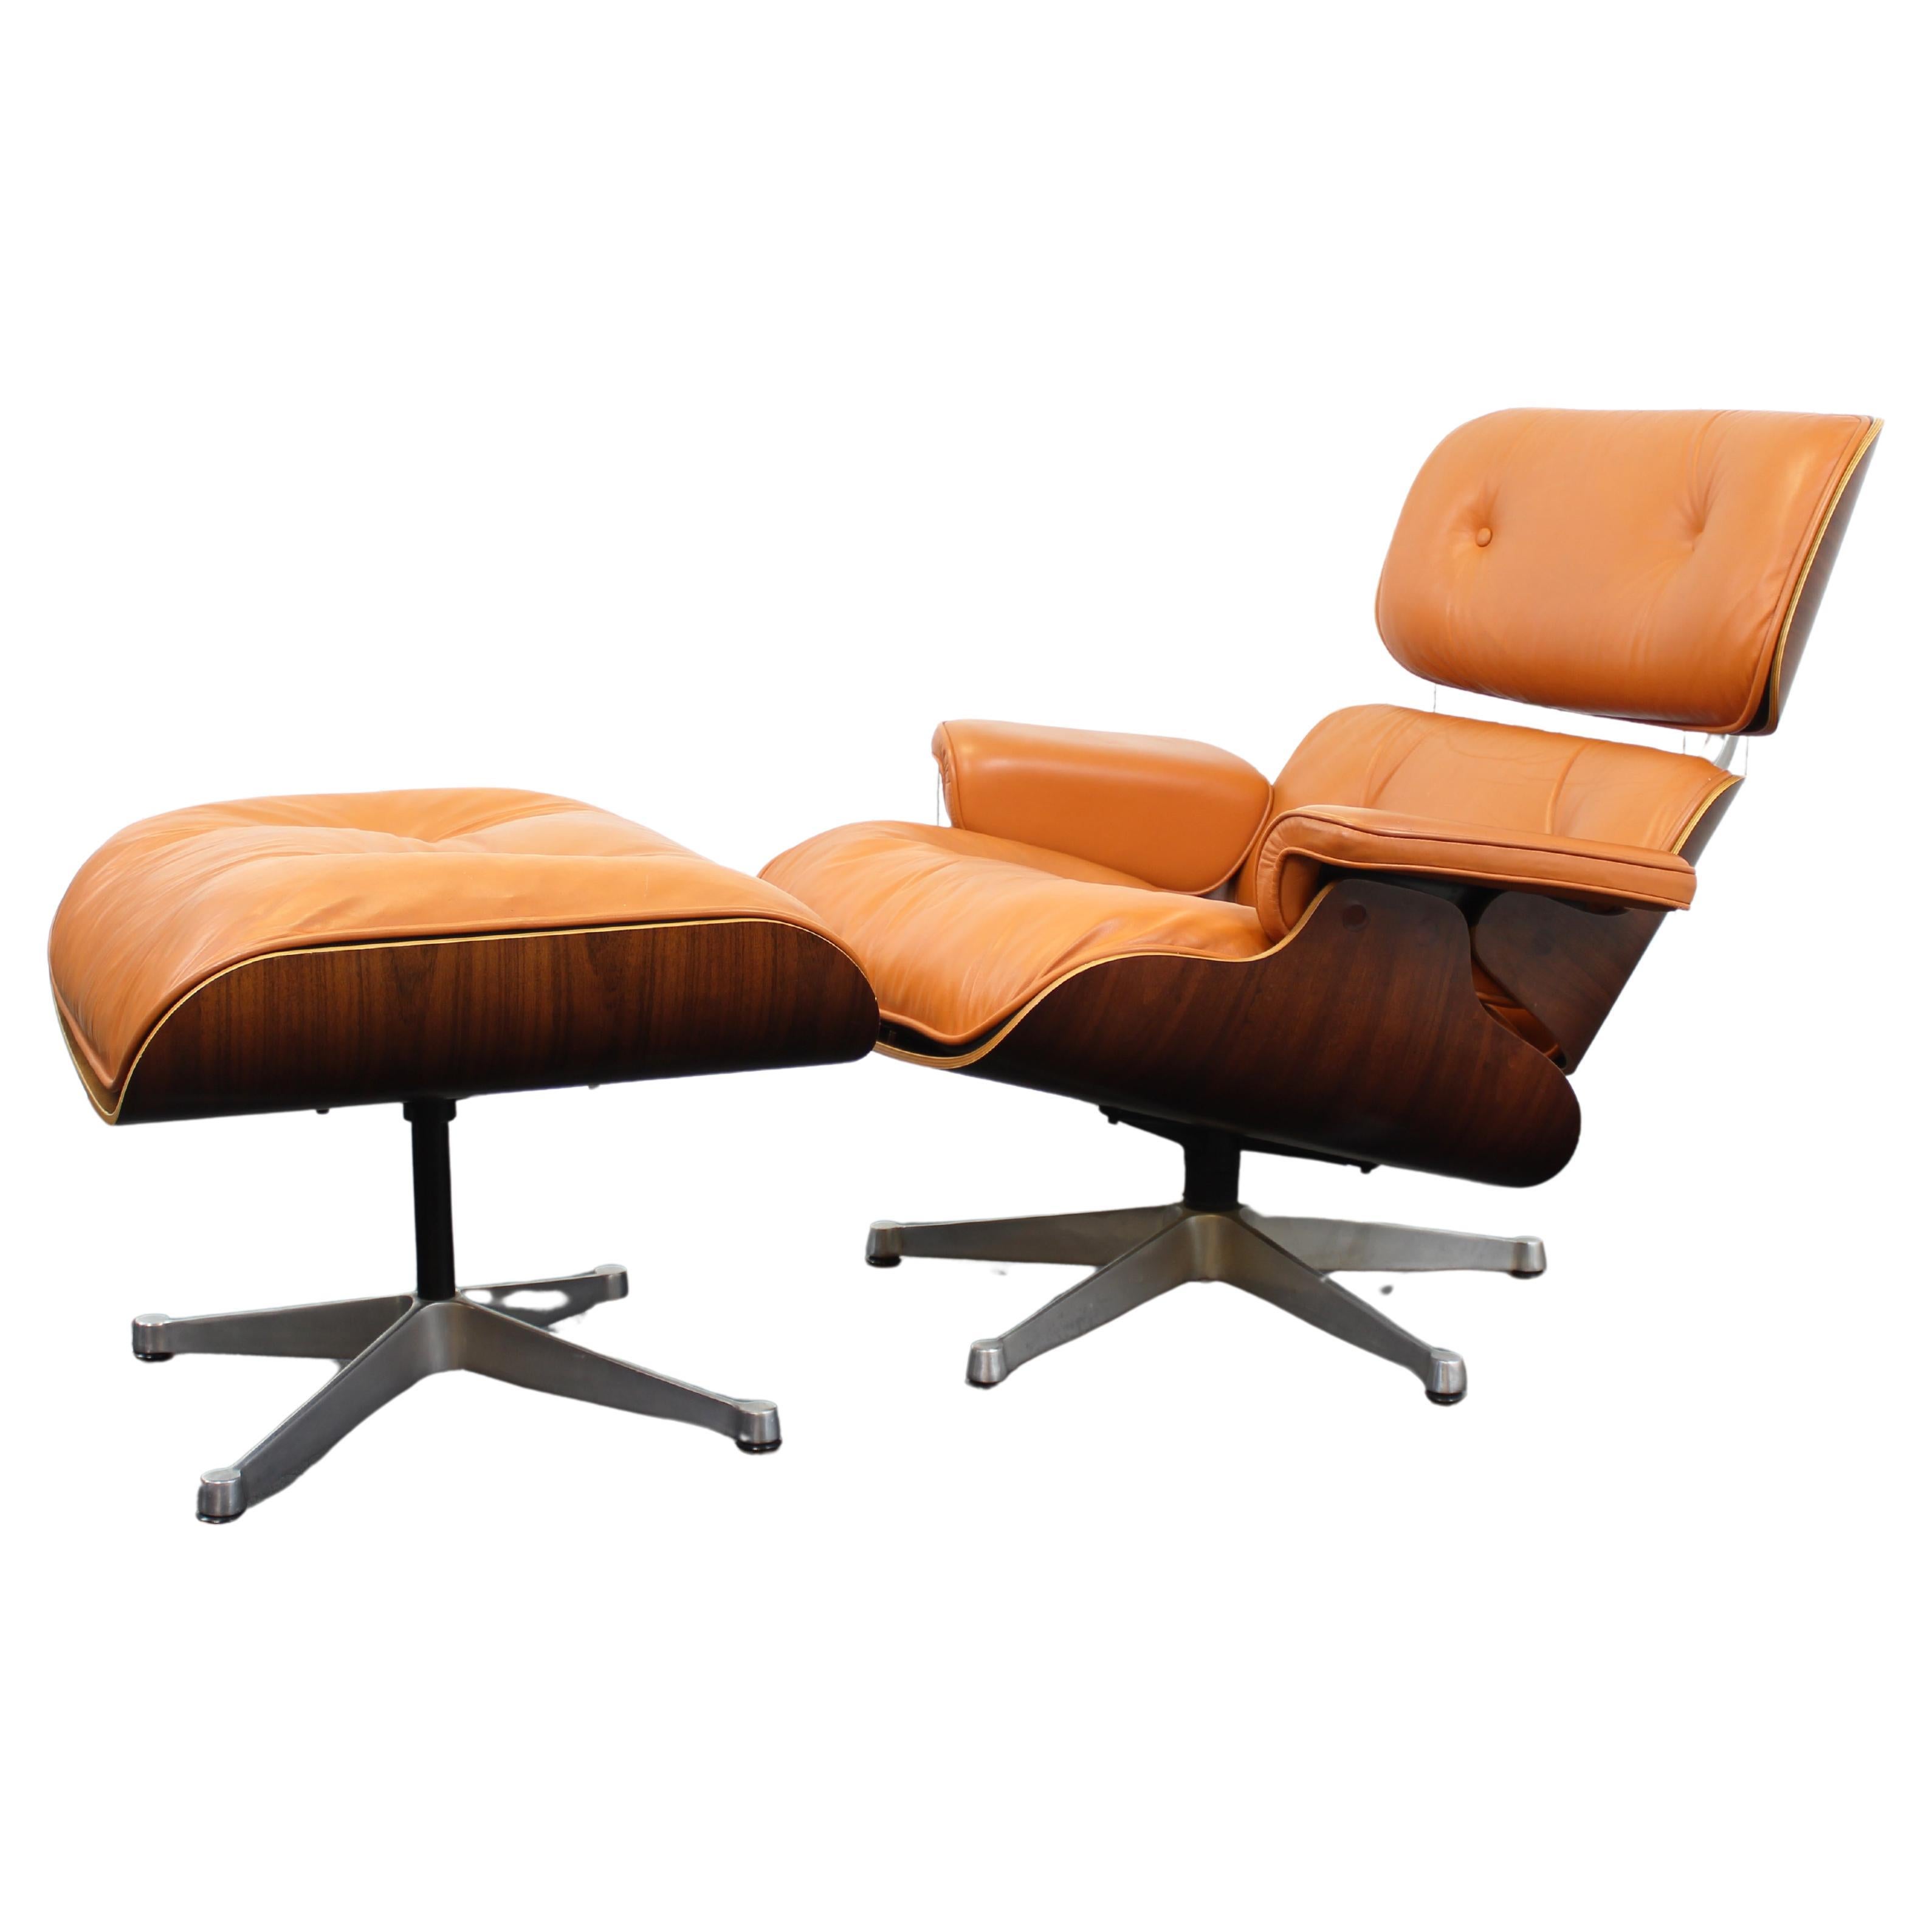 What are the Eames known for?